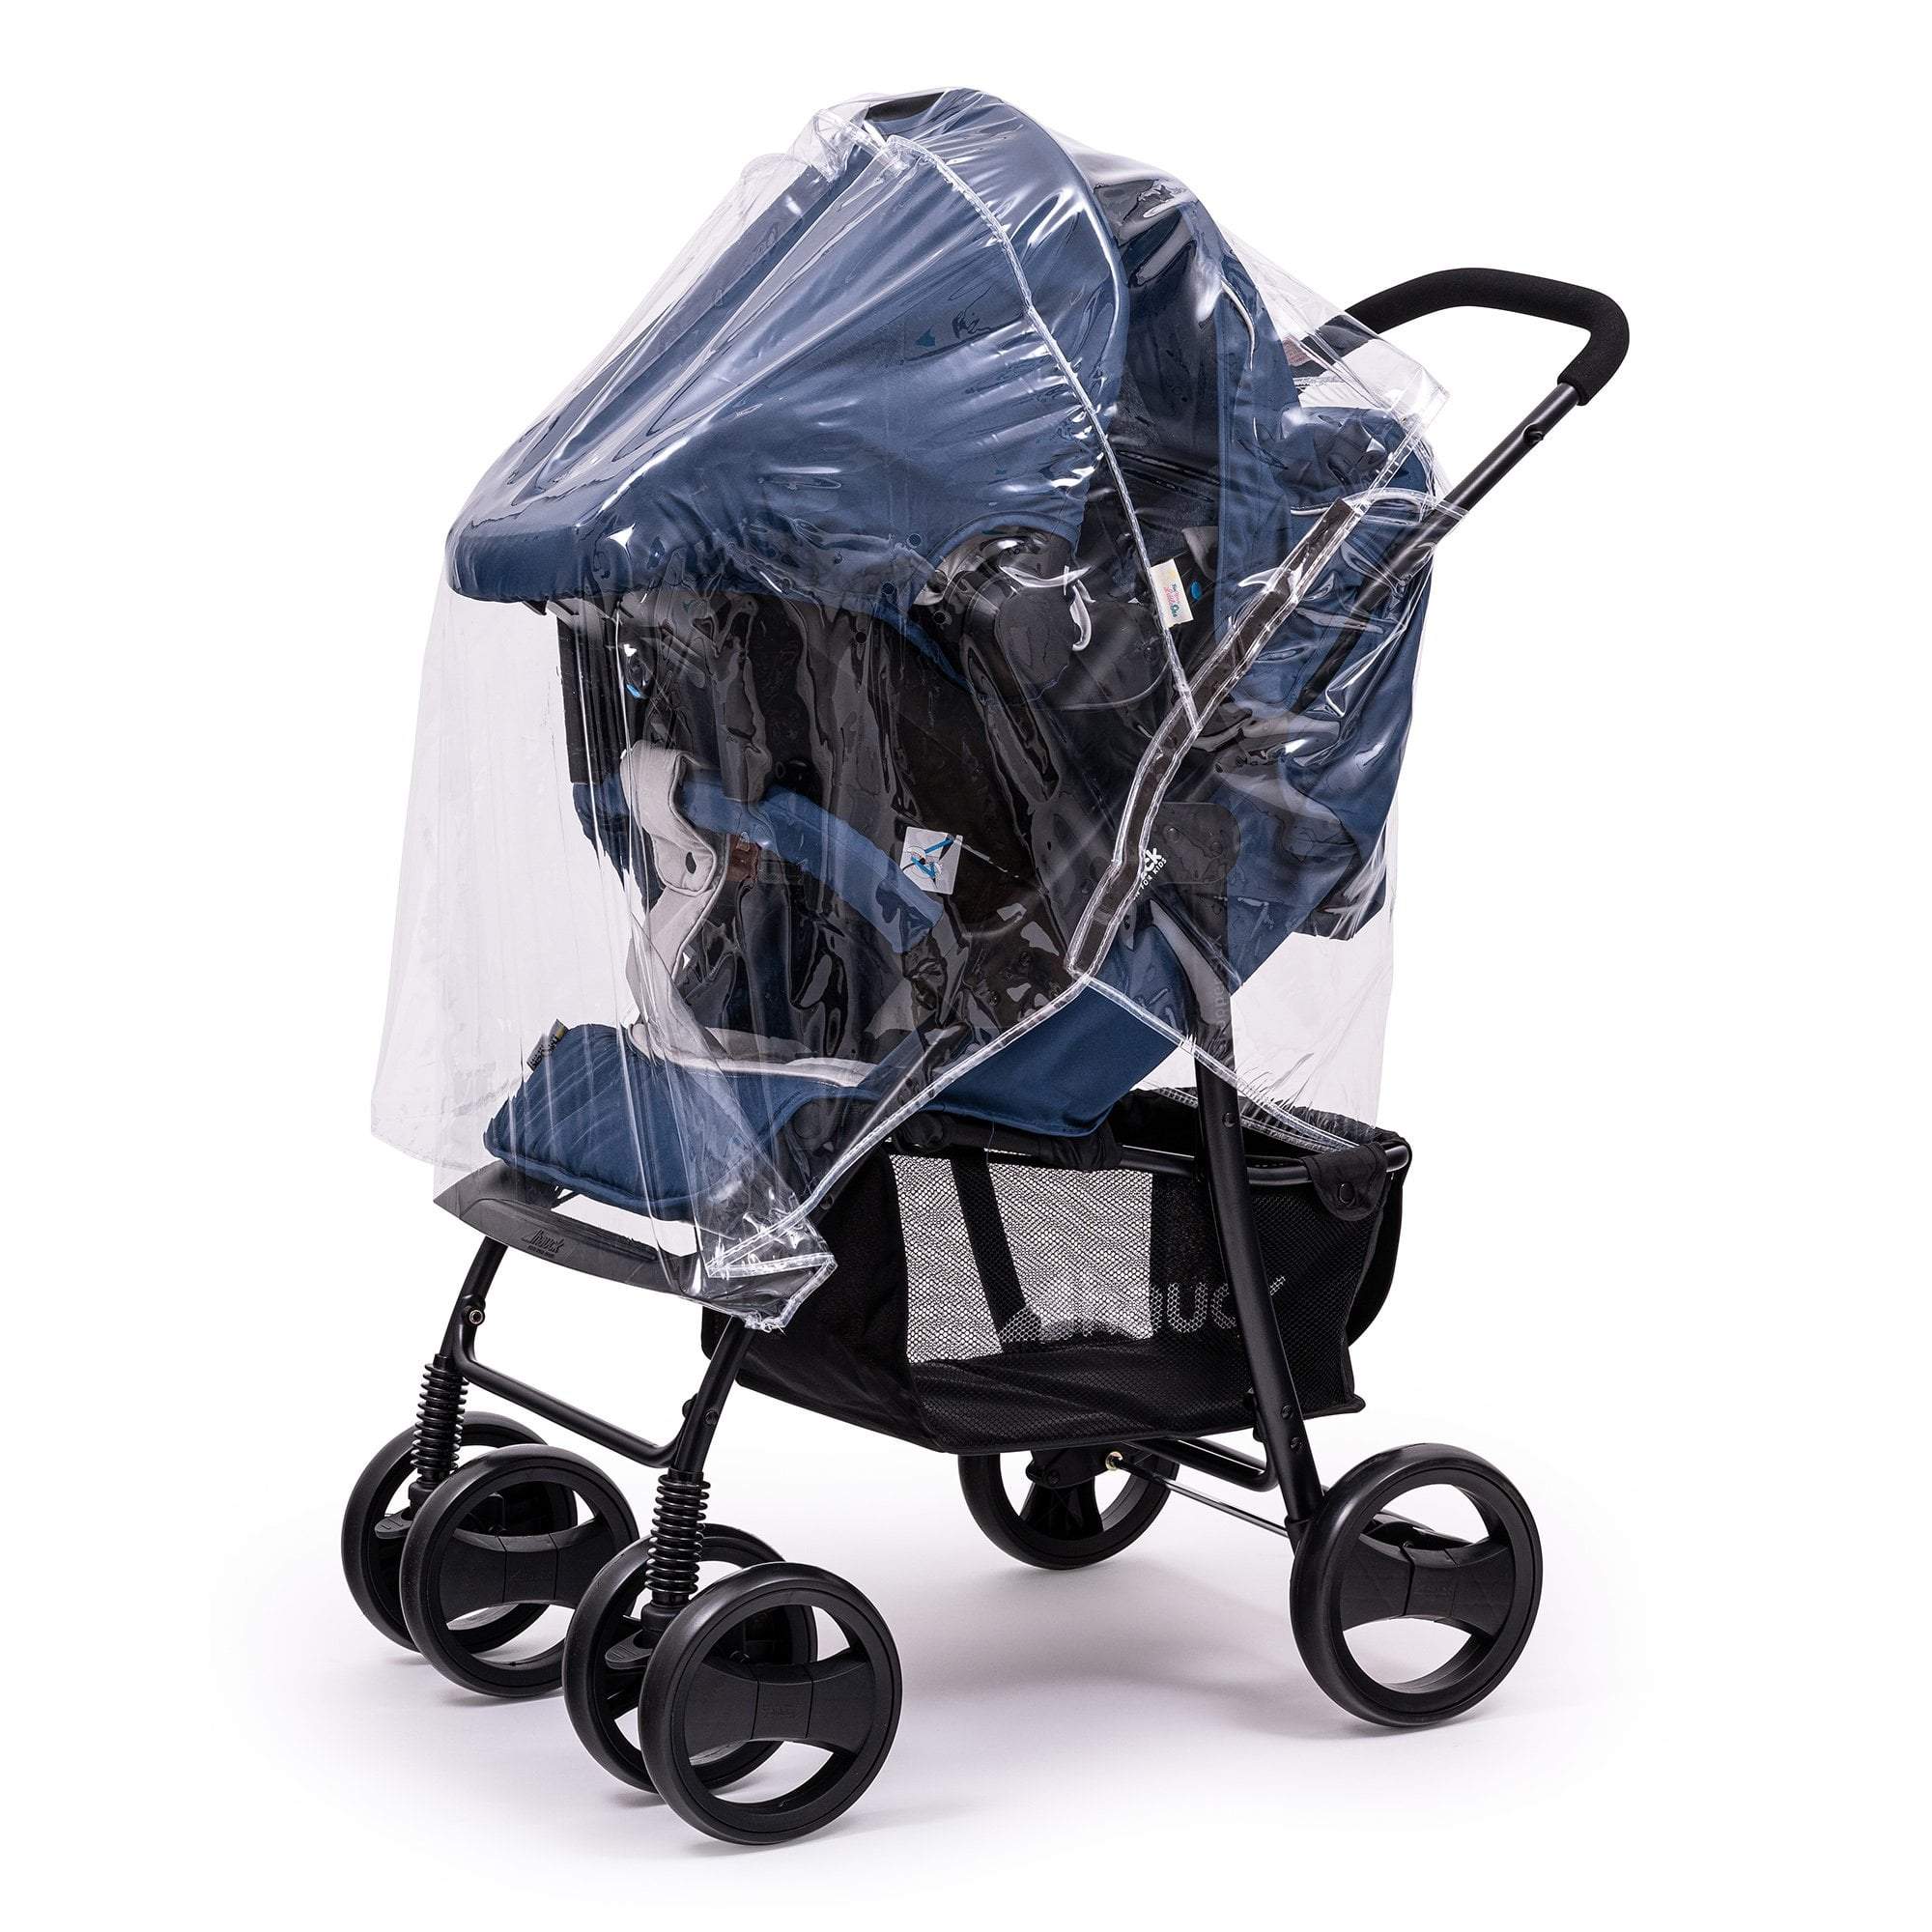 Travel System Raincover Compatible with Uppababy - Fits All Models - For Your Little One